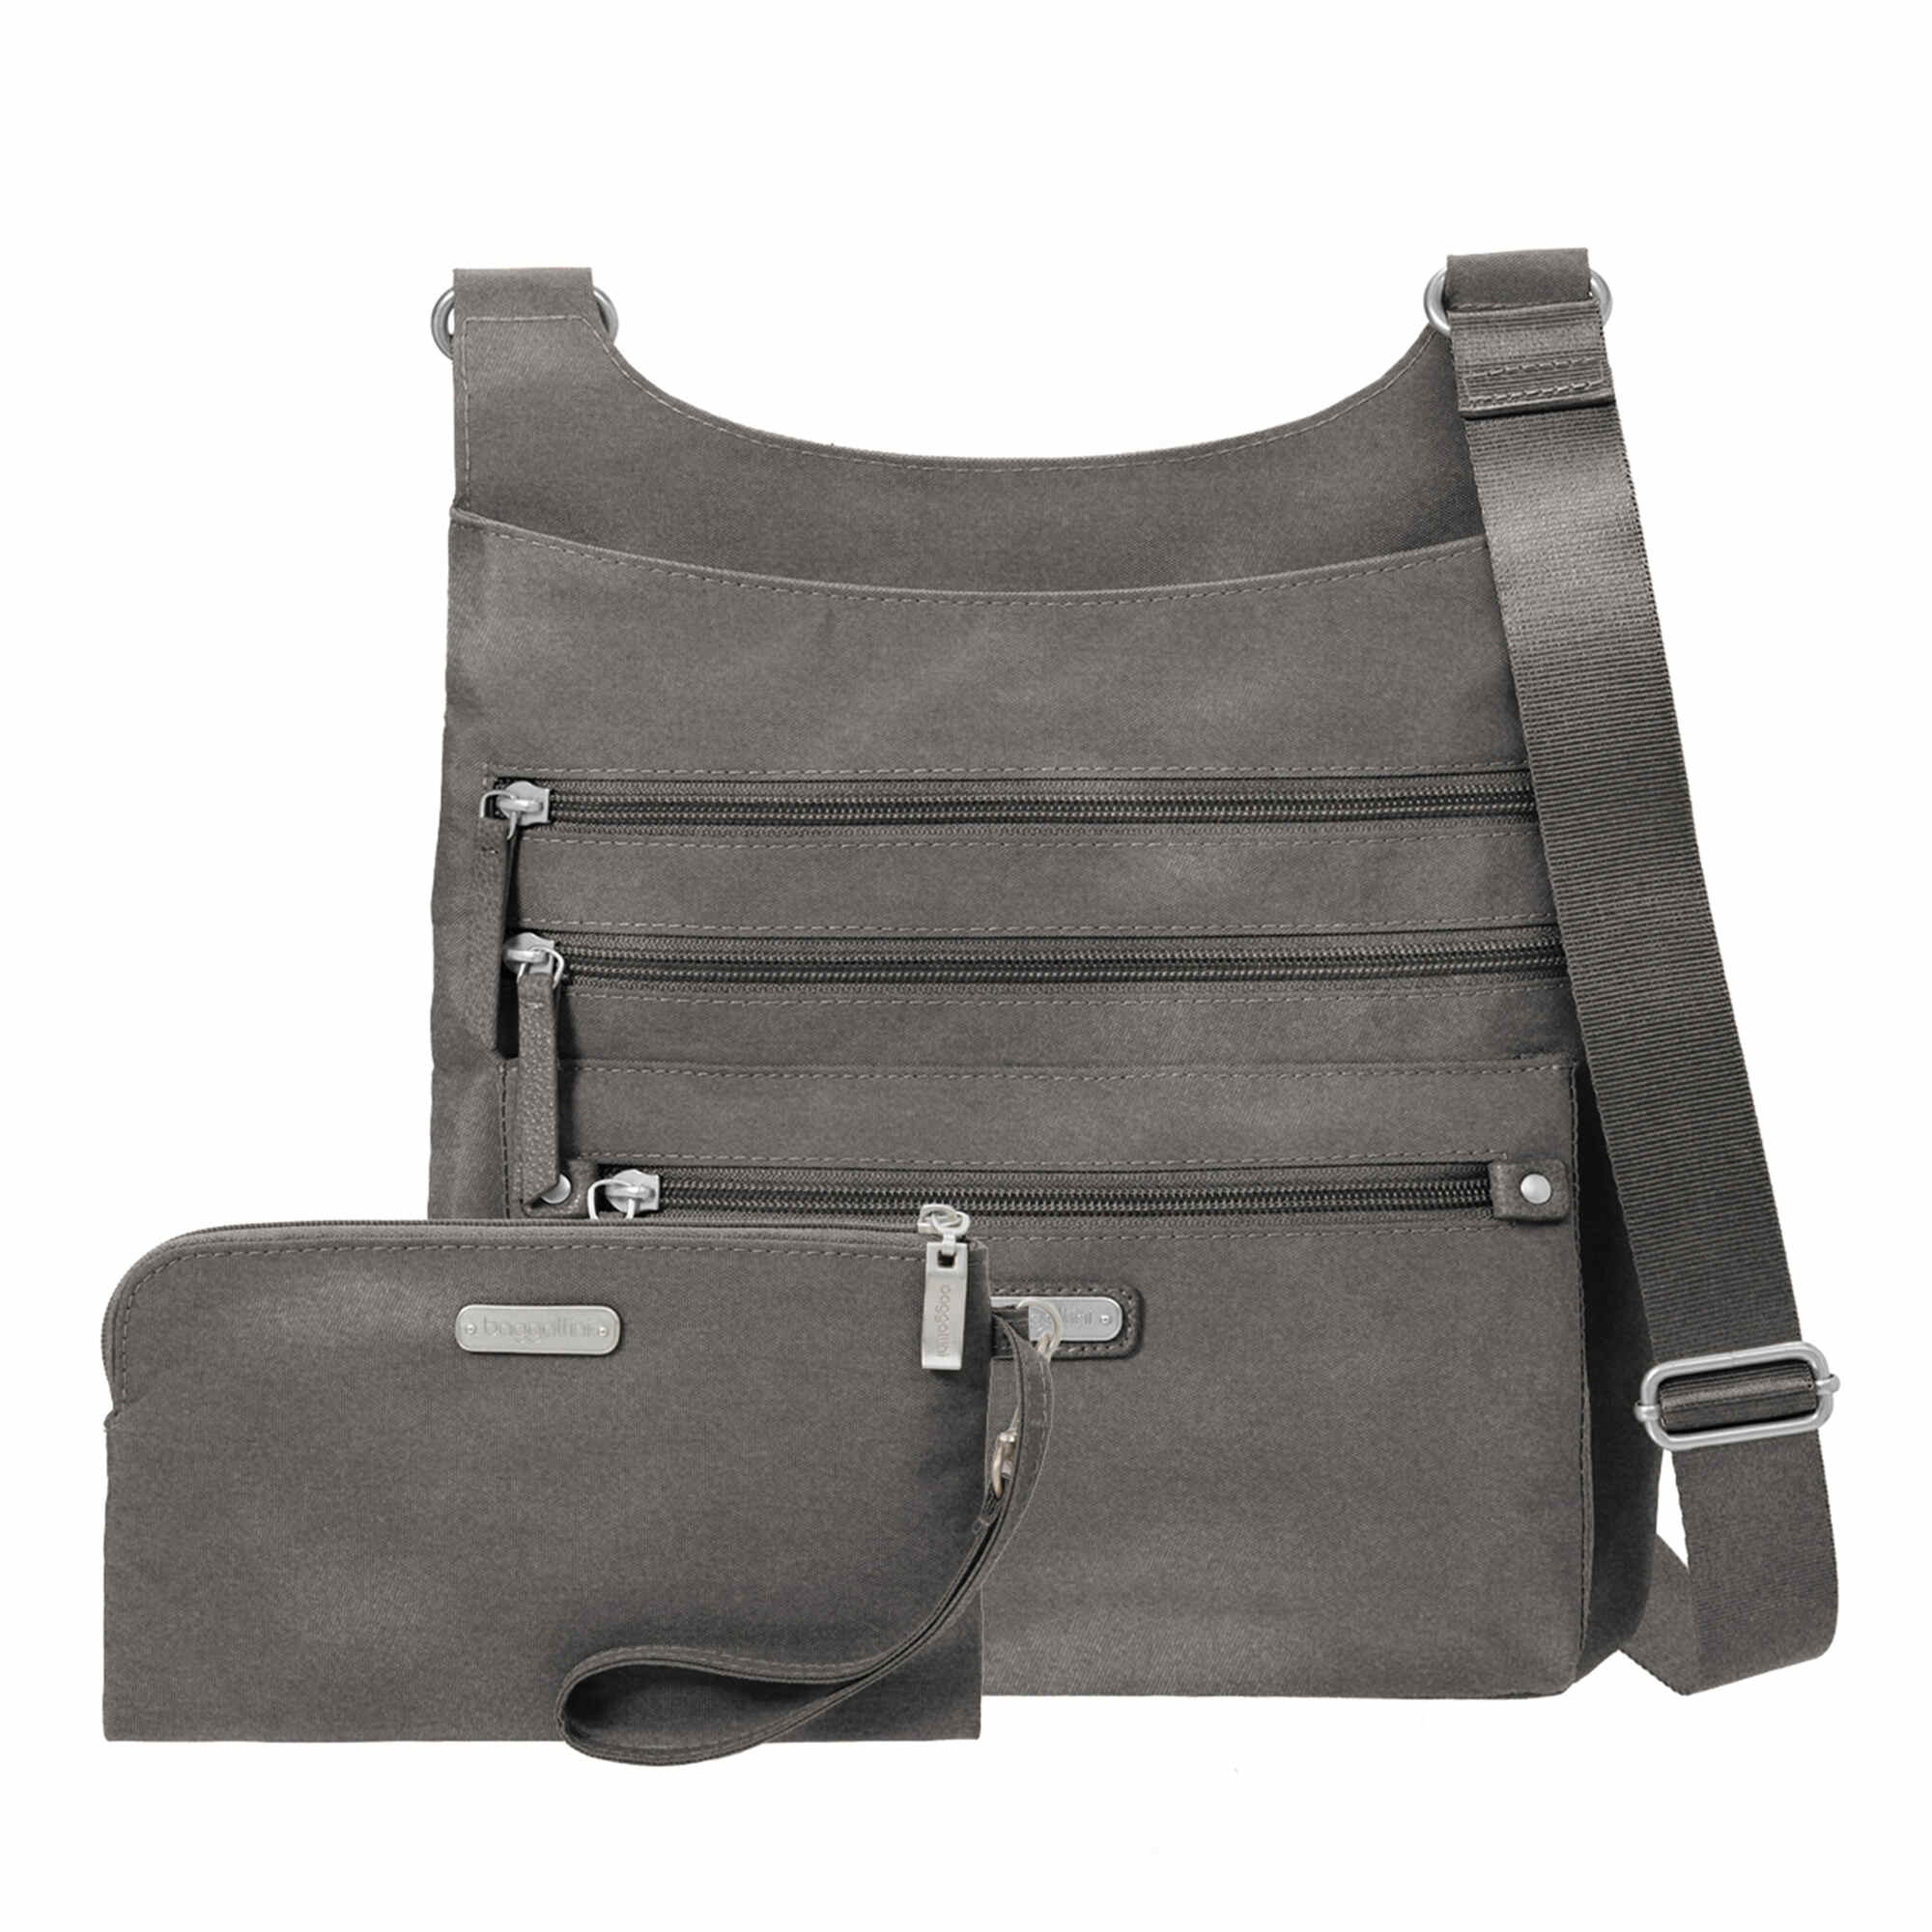 Baggallini Everywhere Bag Review Our Readers Tell All